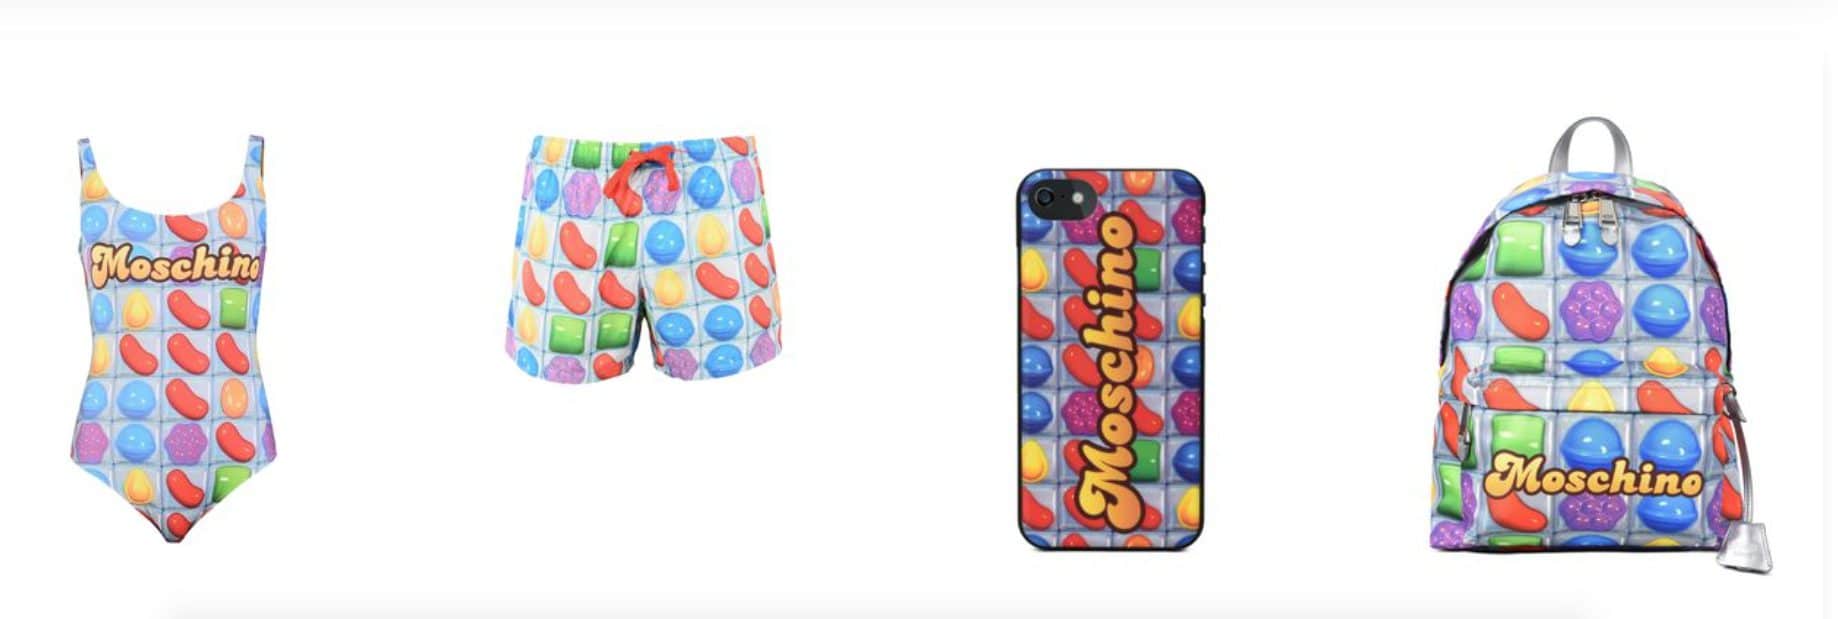 Moschino Candy Crush capsule collection.